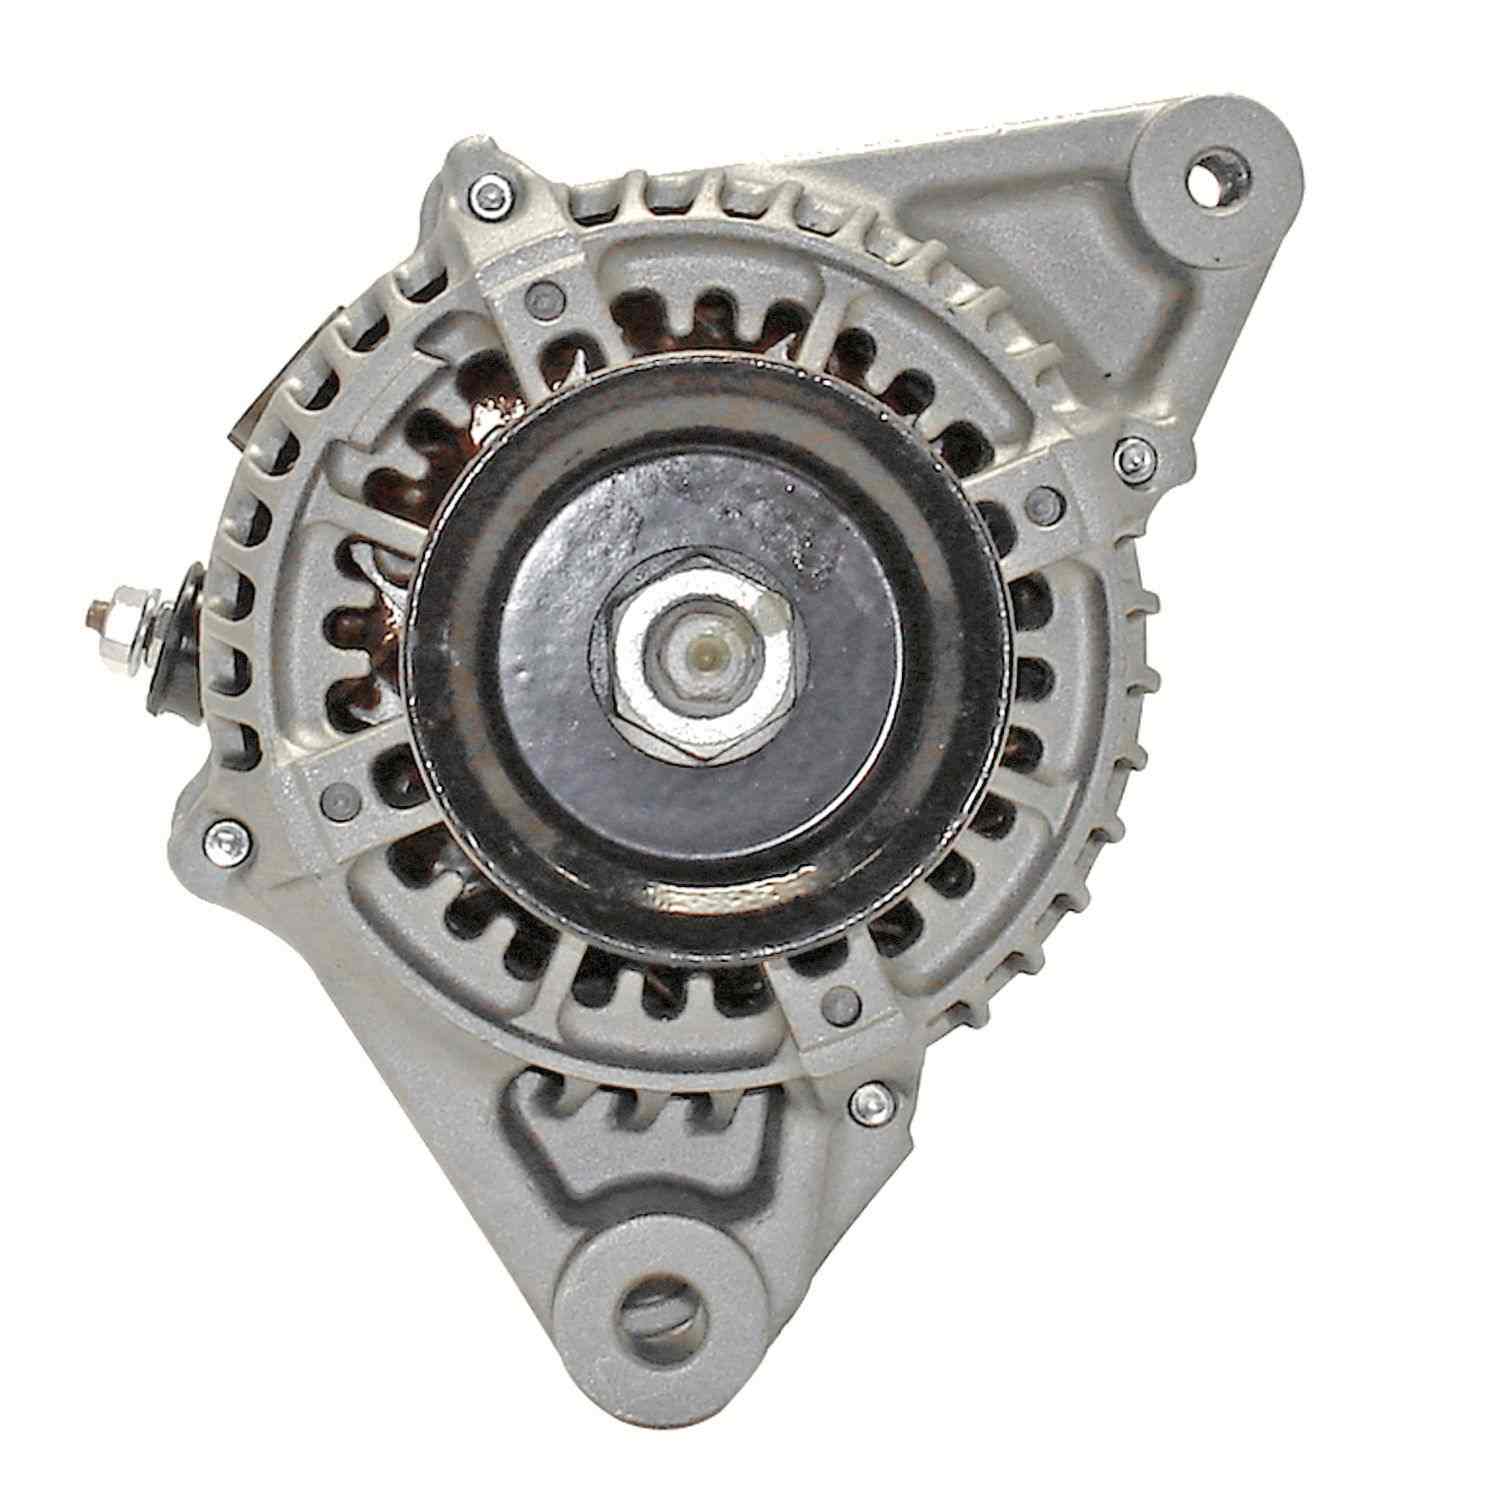 ACDELCO GOLD/PROFESSIONAL - Reman Alternator - DCC 334-1226A